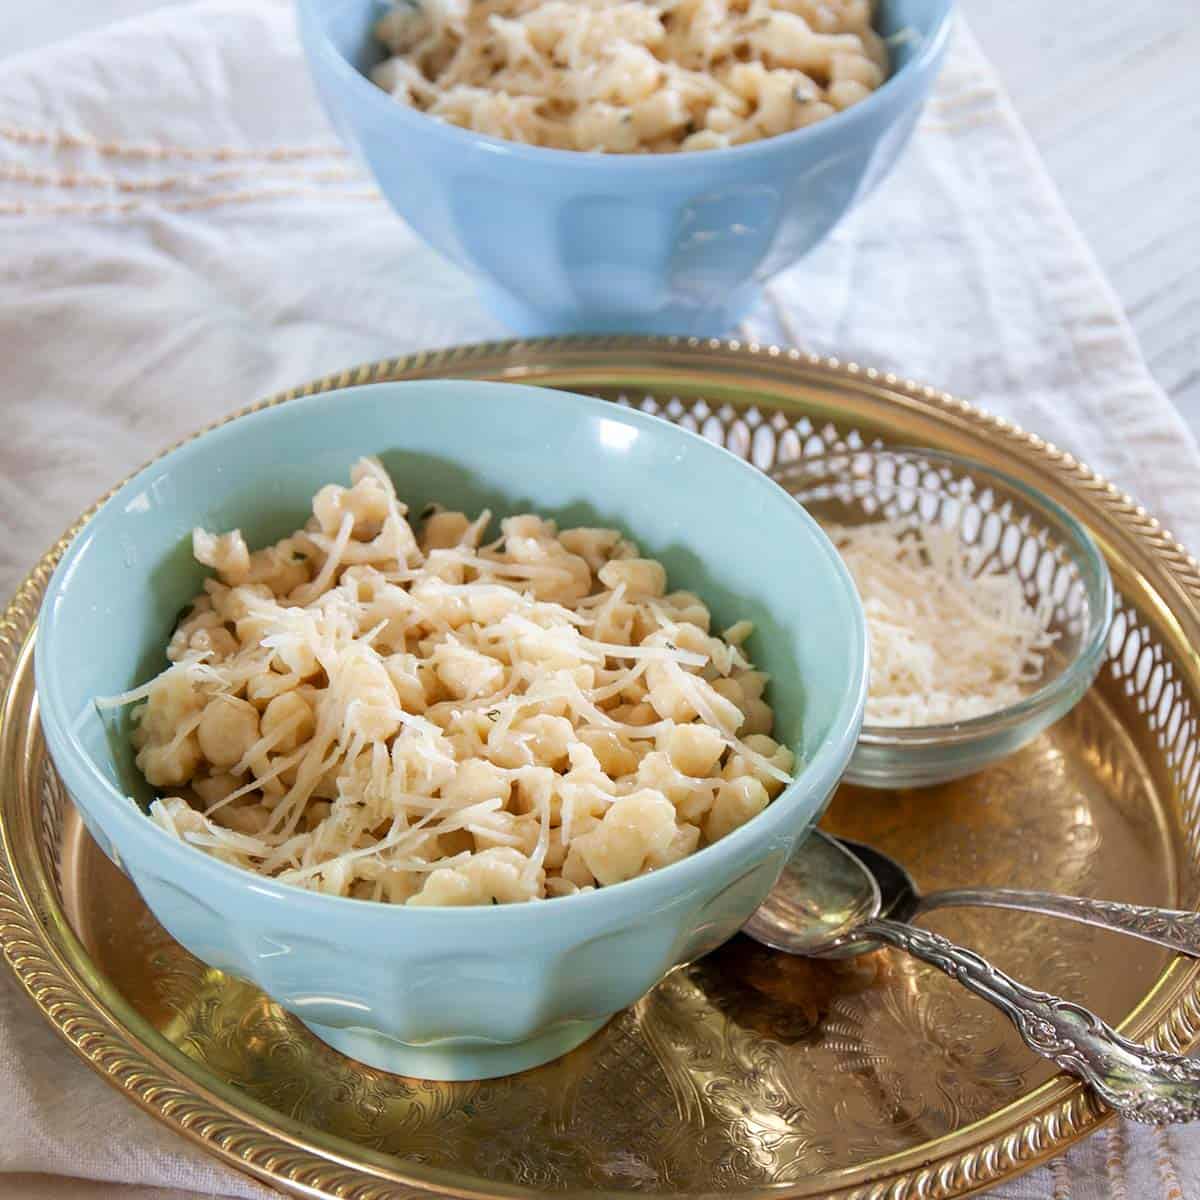 Bowl of Spaetzle with parmesan cheese on top.